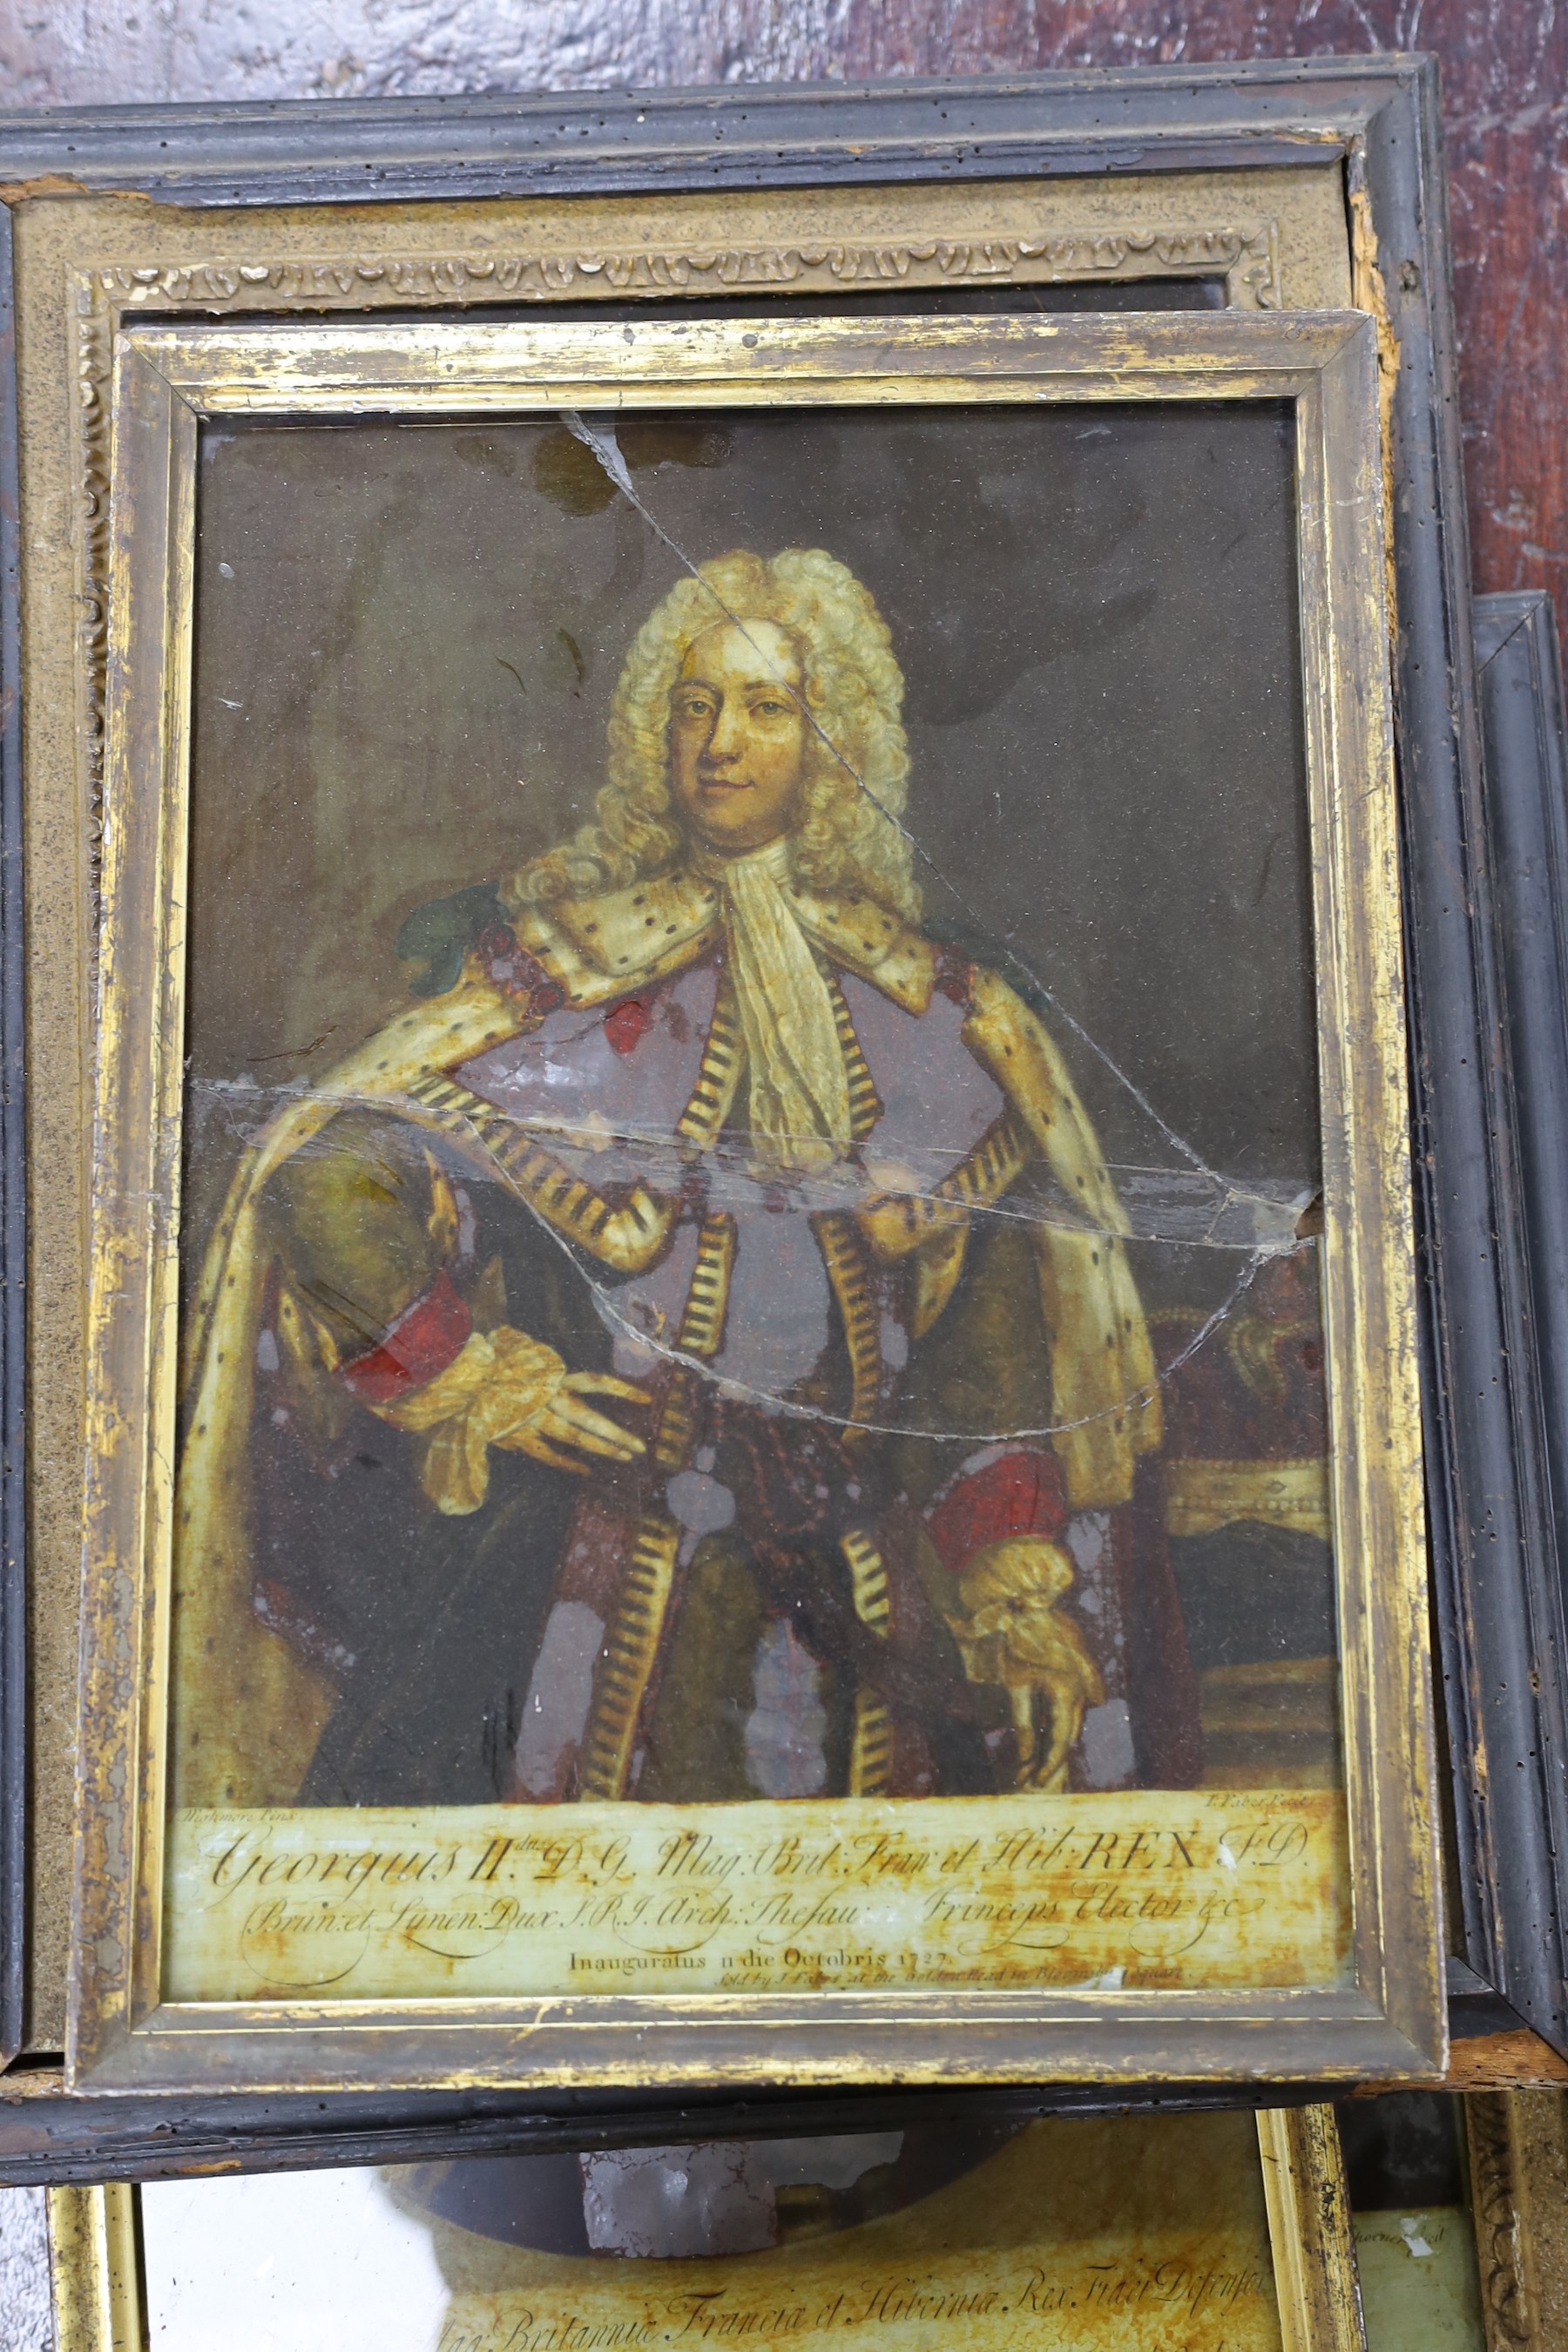 Spencer after Benwell, reverse print on glass, 'The Studious Fair', 36 x 26cm, together with four other damaged reverse prints of John Wilkes, George II and George III